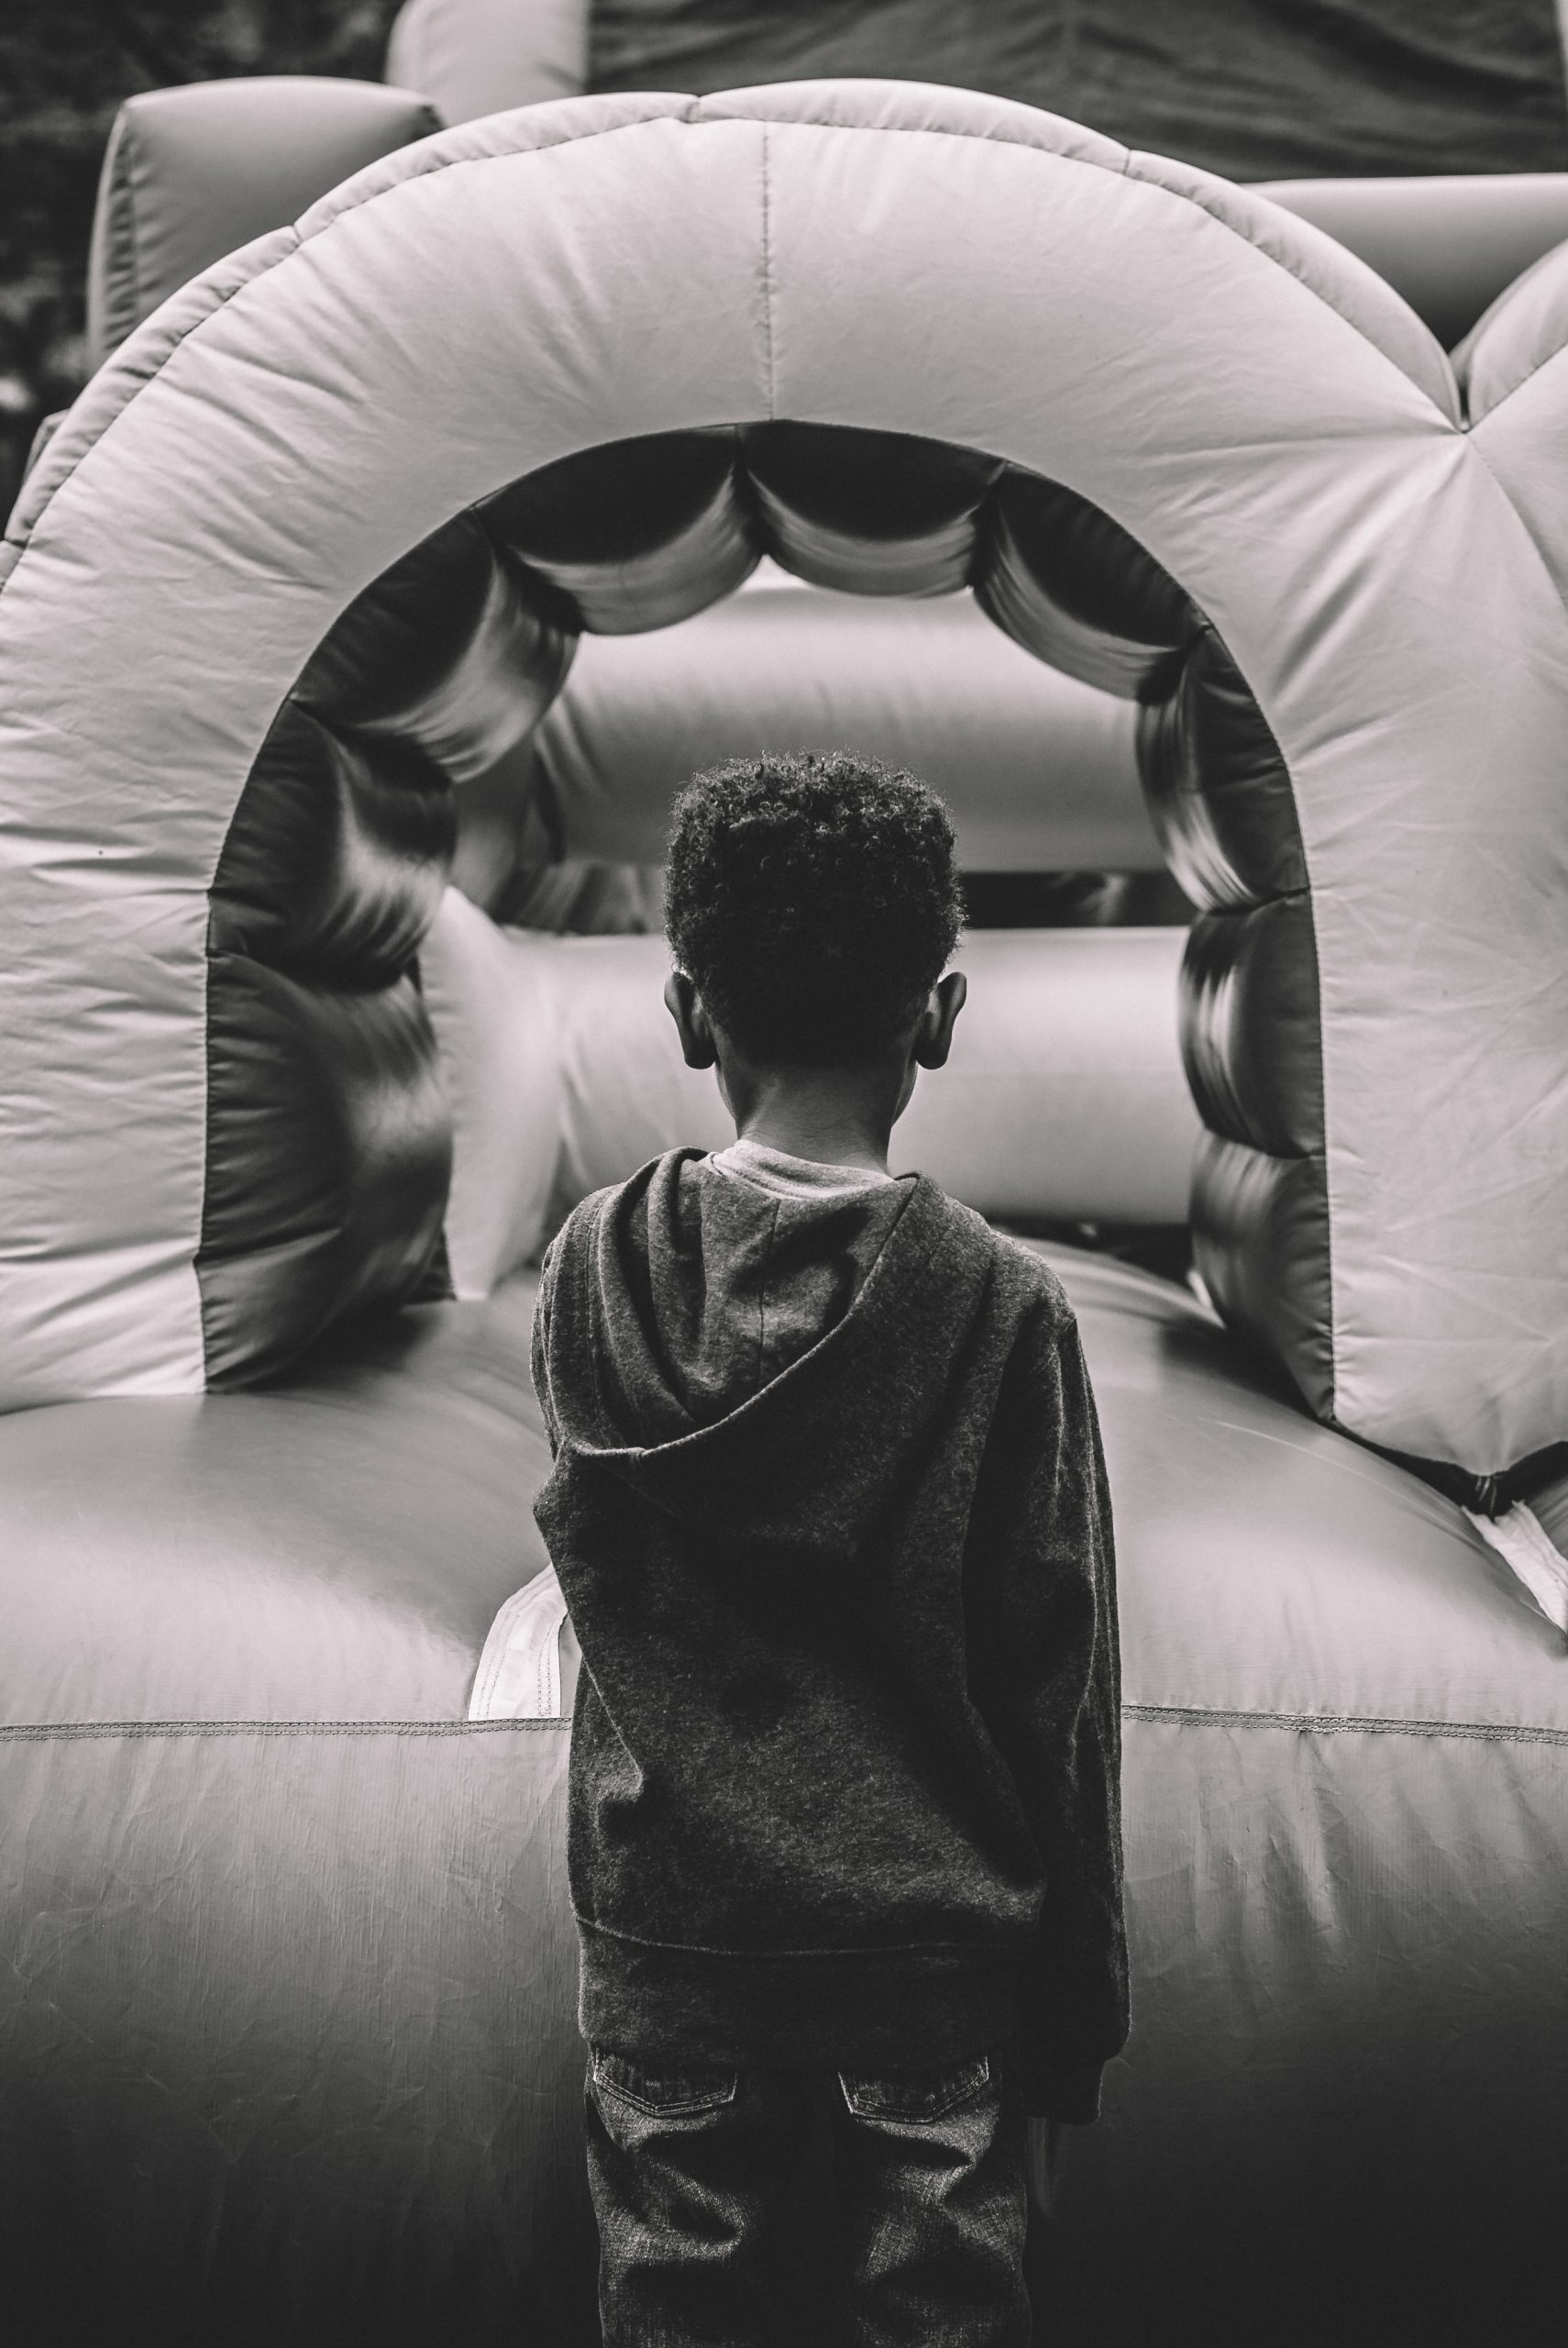 Bounce house rental in Syracuse